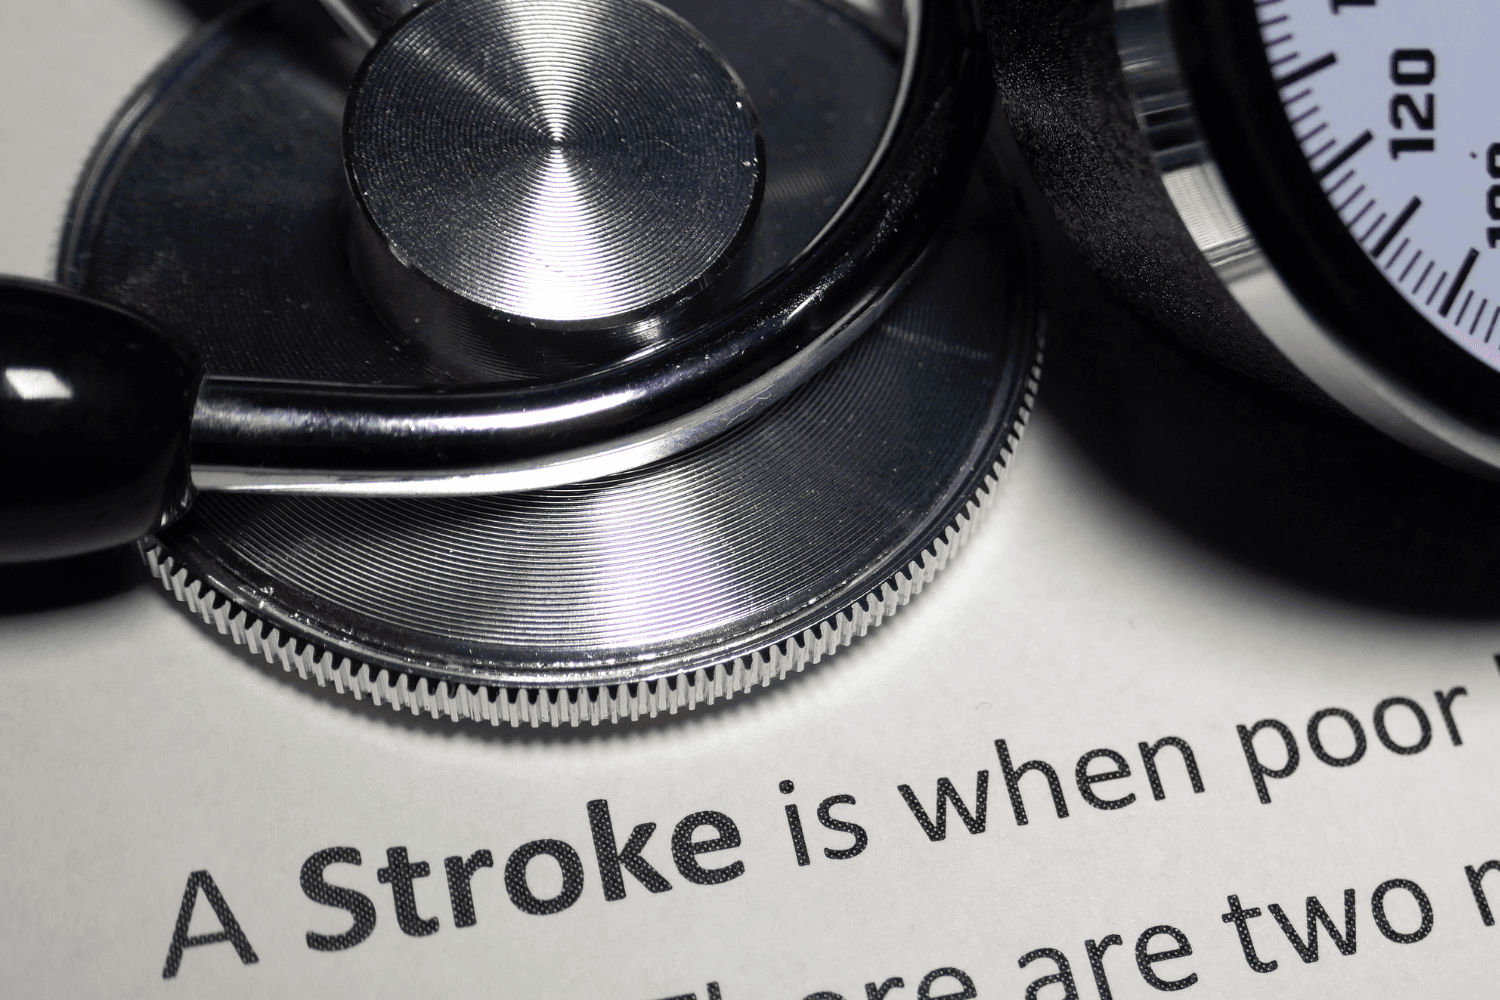 Image with sentence explaining what a stroke is